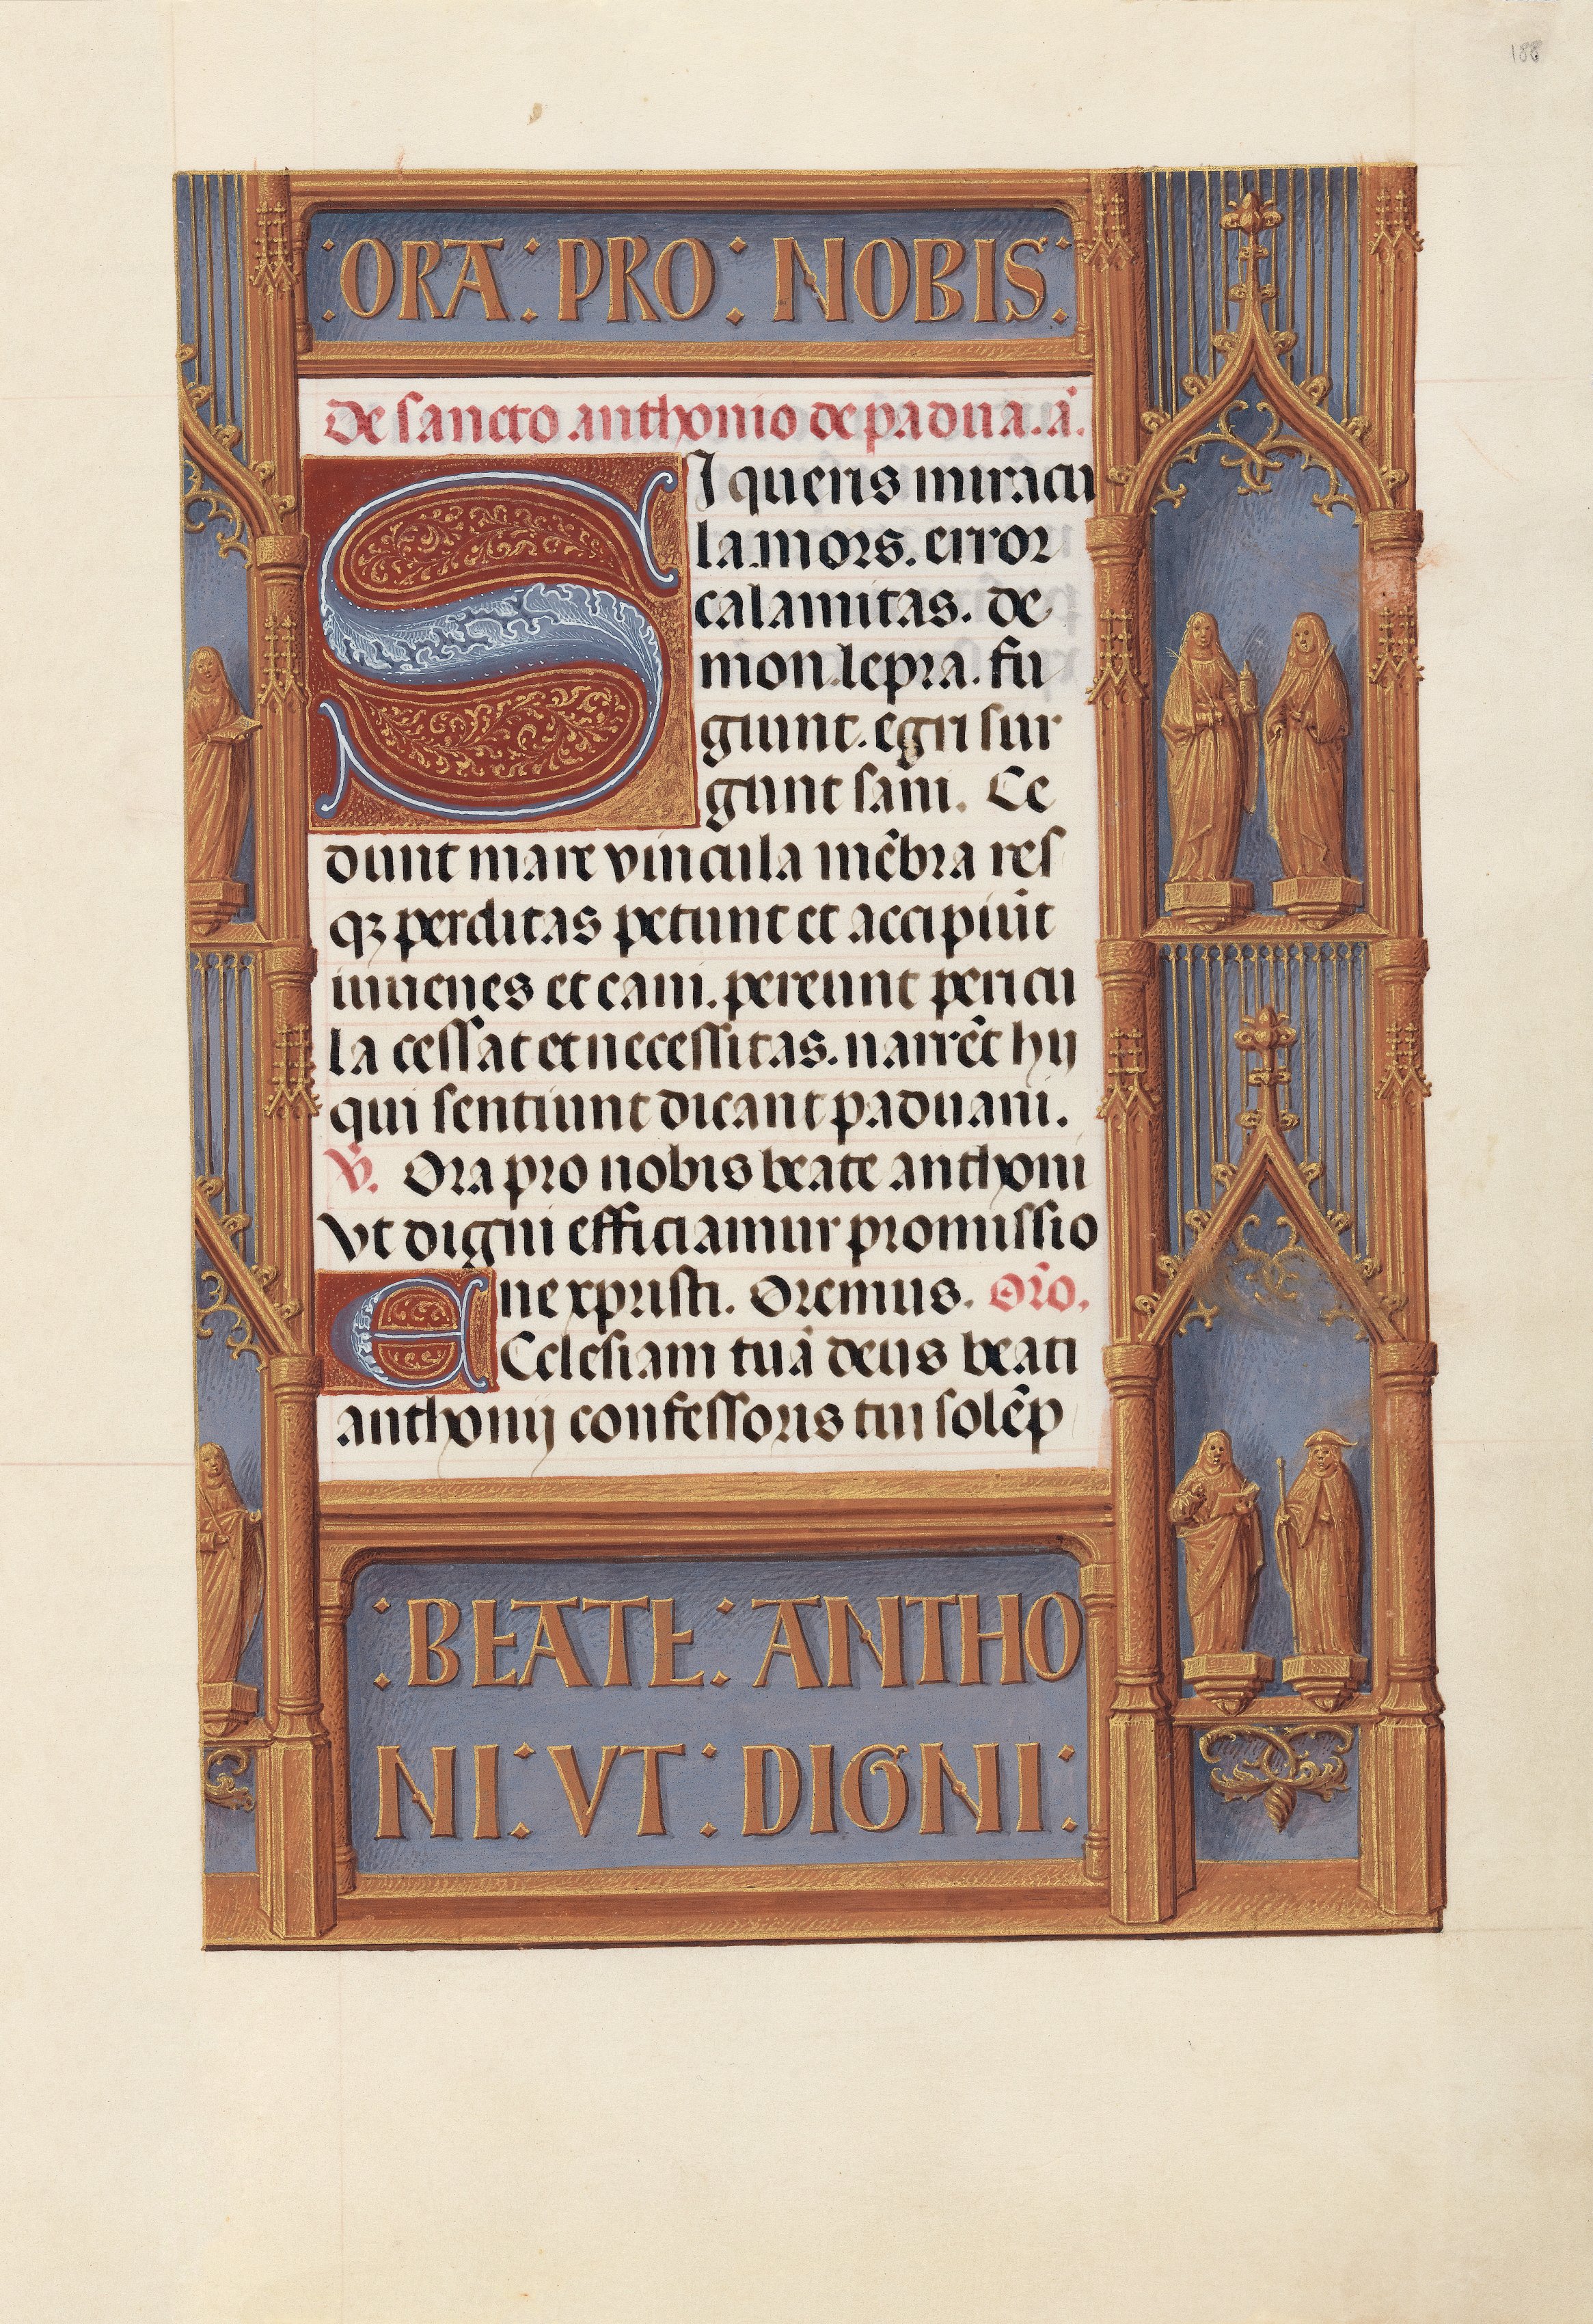 Hours of Queen Isabella the Catholic, Queen of Spain:  Fol. 188r